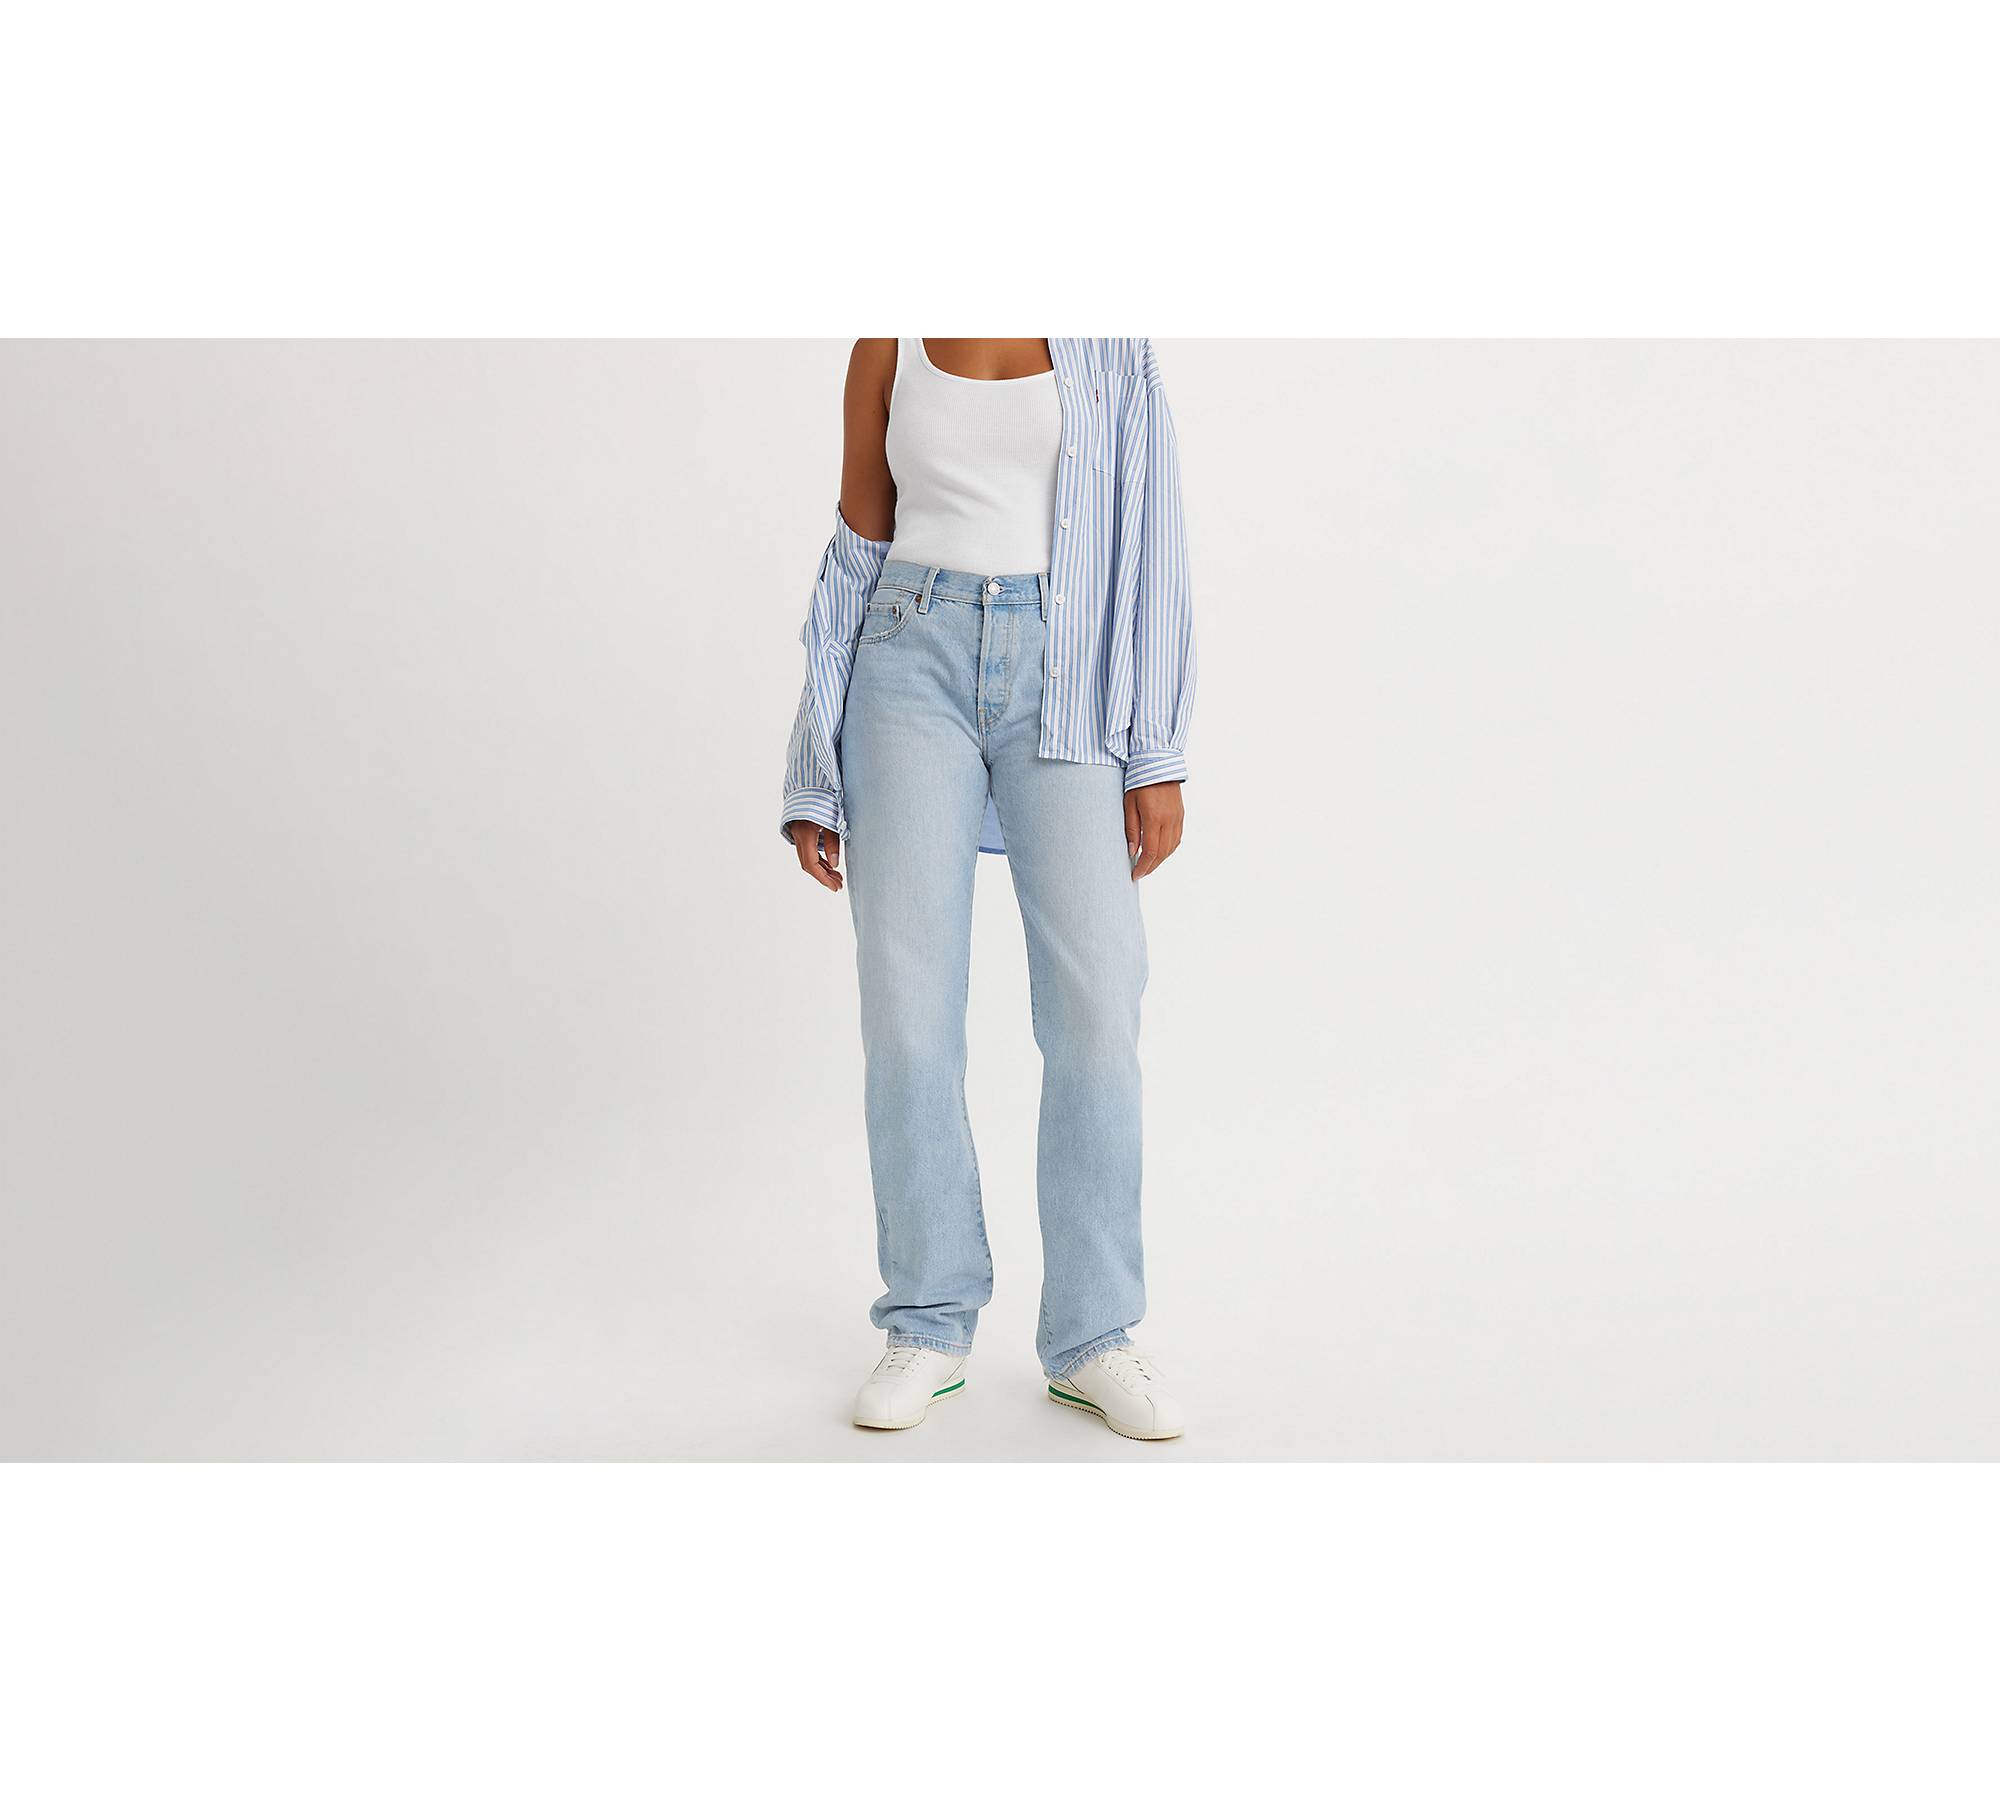 Levi's Ribcage Straight Ankle Jeans in Light Wash • Shop American